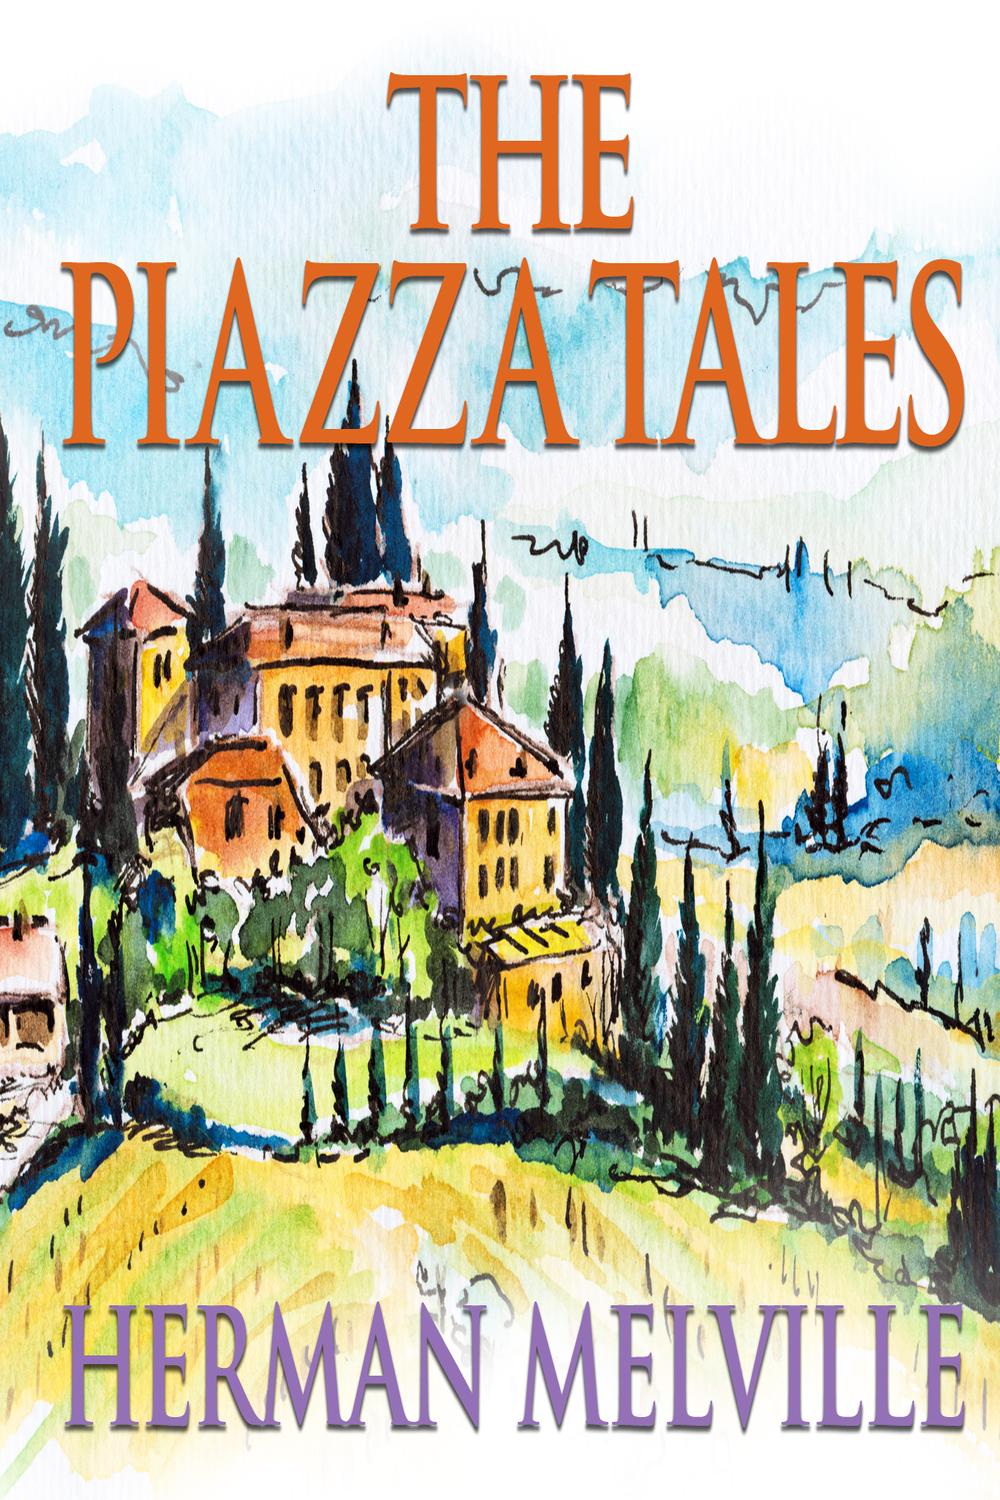 The Piazza Tales - Herman Melville,,